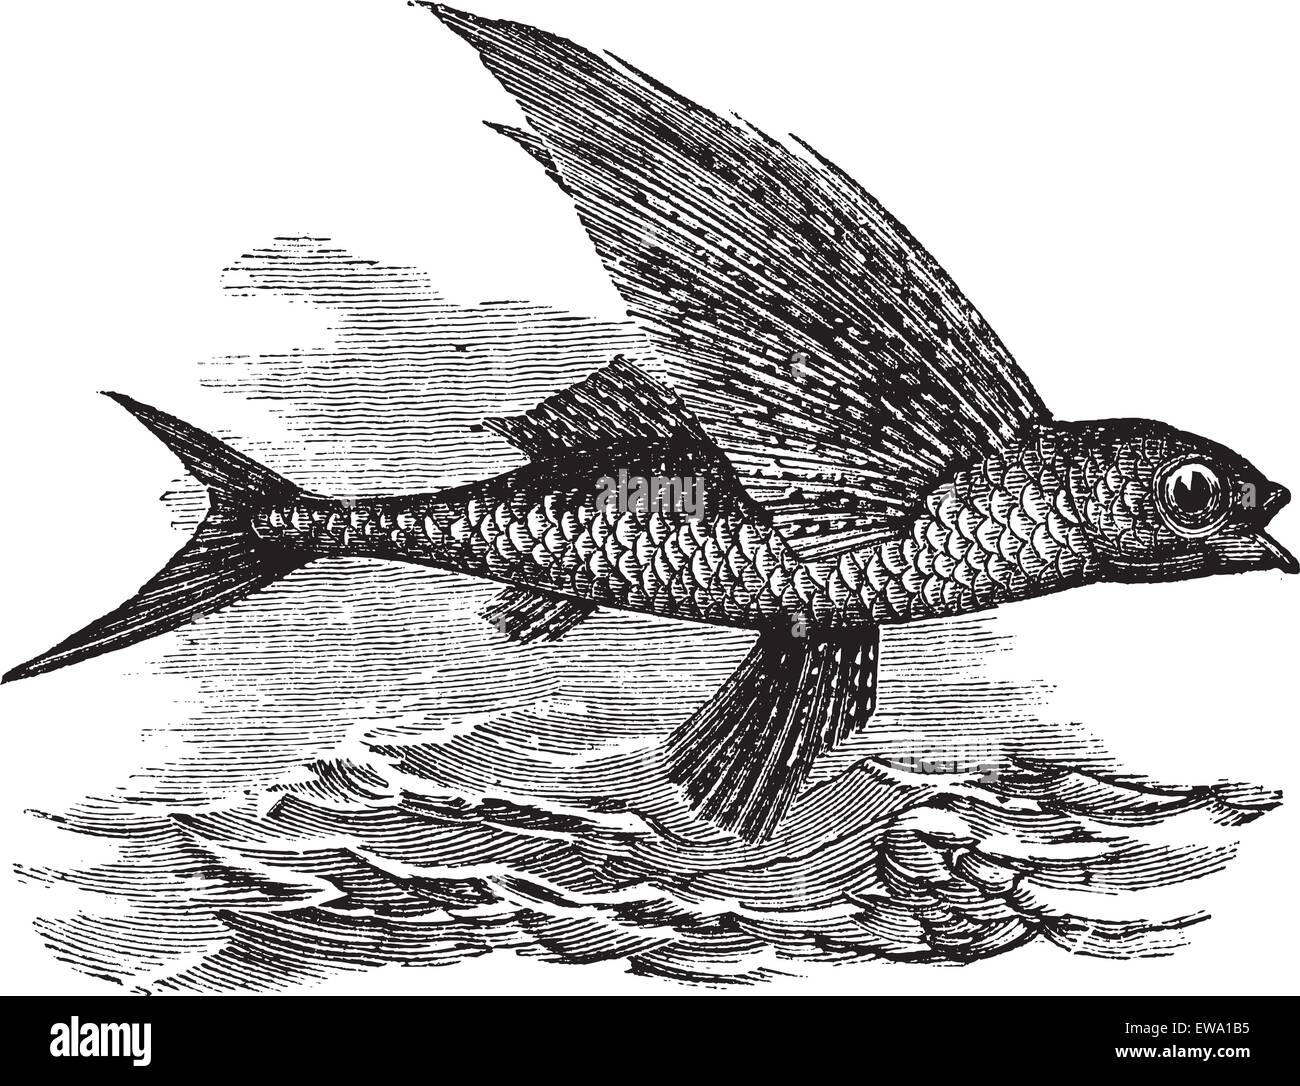 Flying Fish or Exocoetidae, vintage engraving. Old engraved illustration of a Flying Fish. Stock Vector